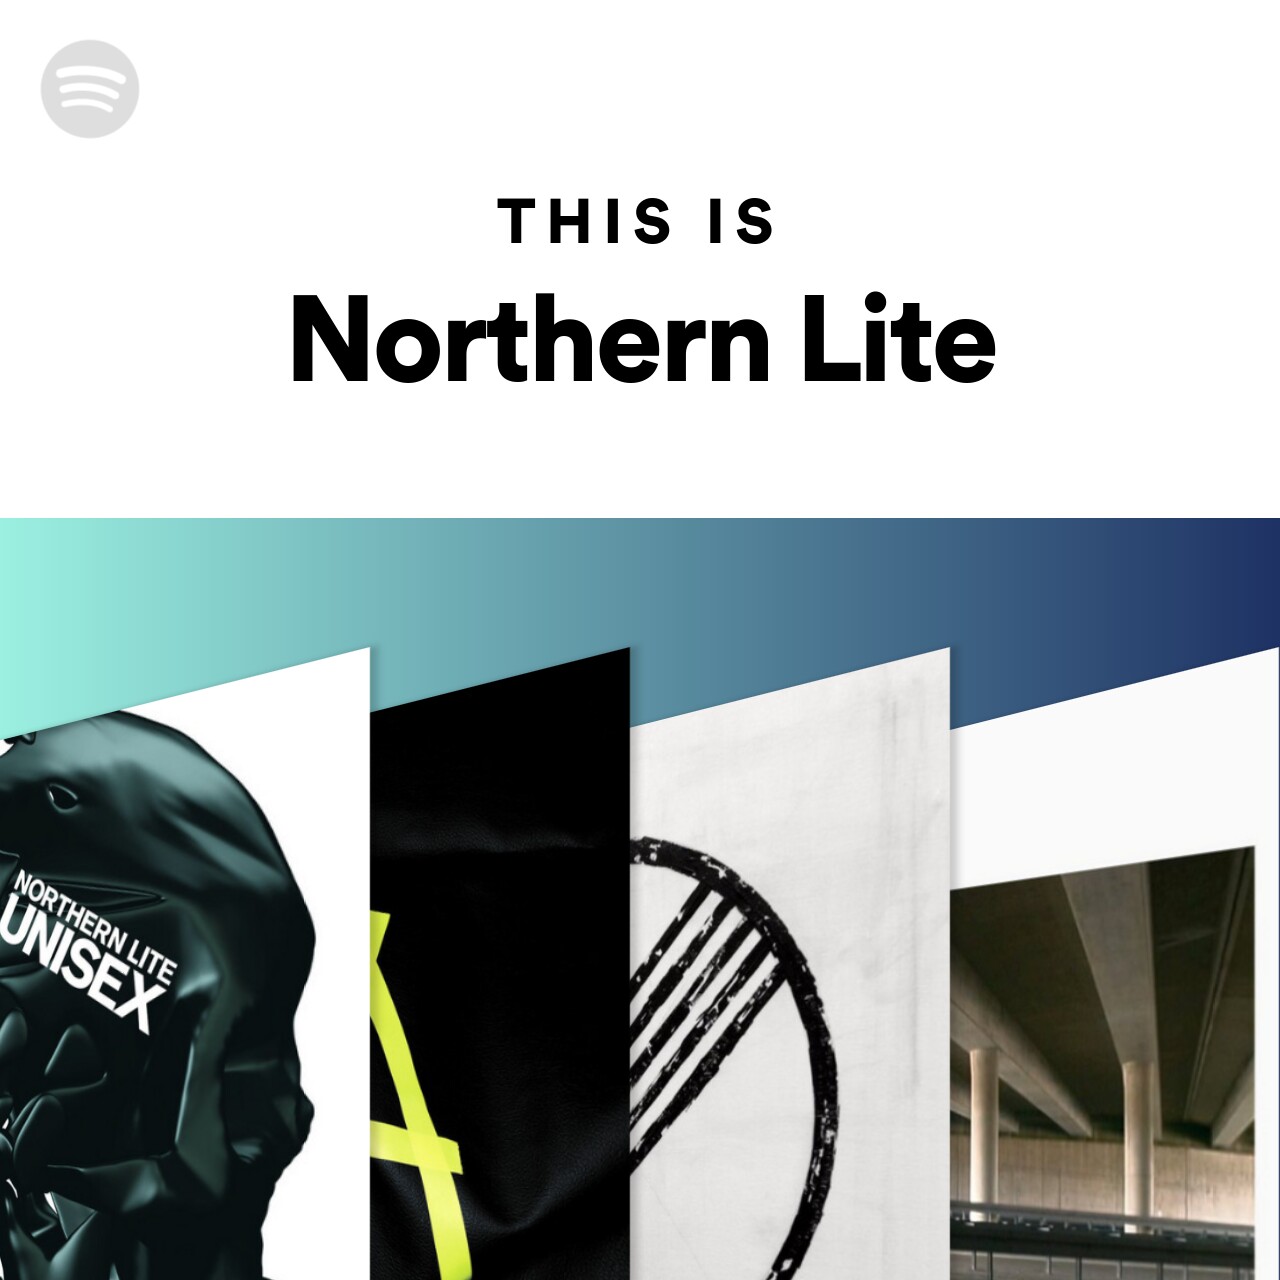 This Is Northern Lite